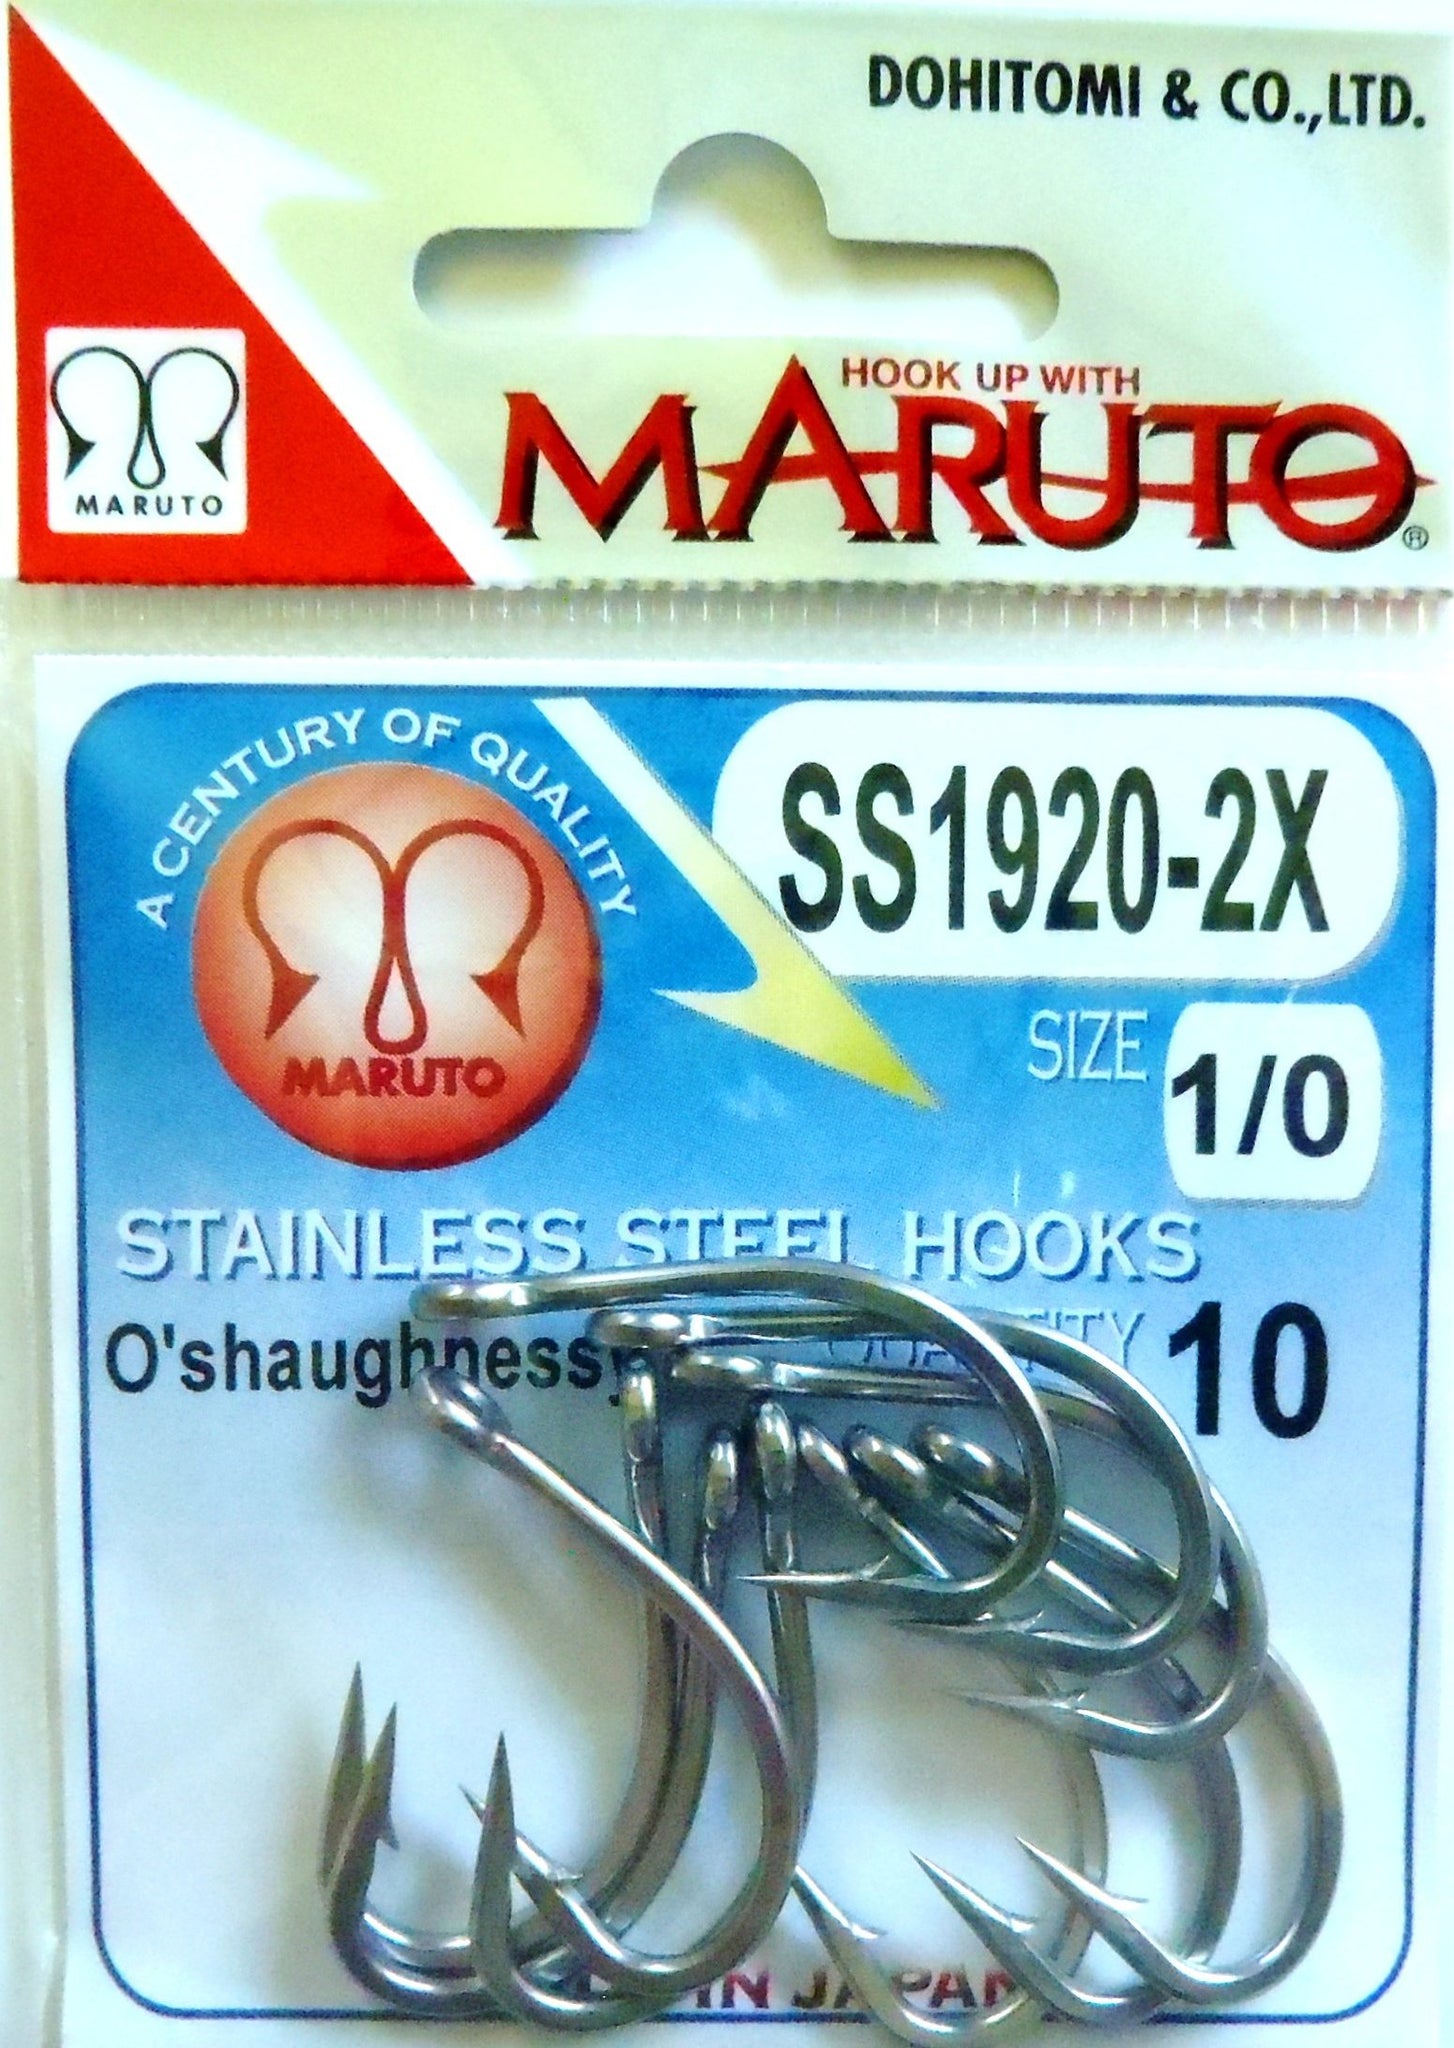 1920-2X Stainless Steel Hook by Maruto – Angler Innovations